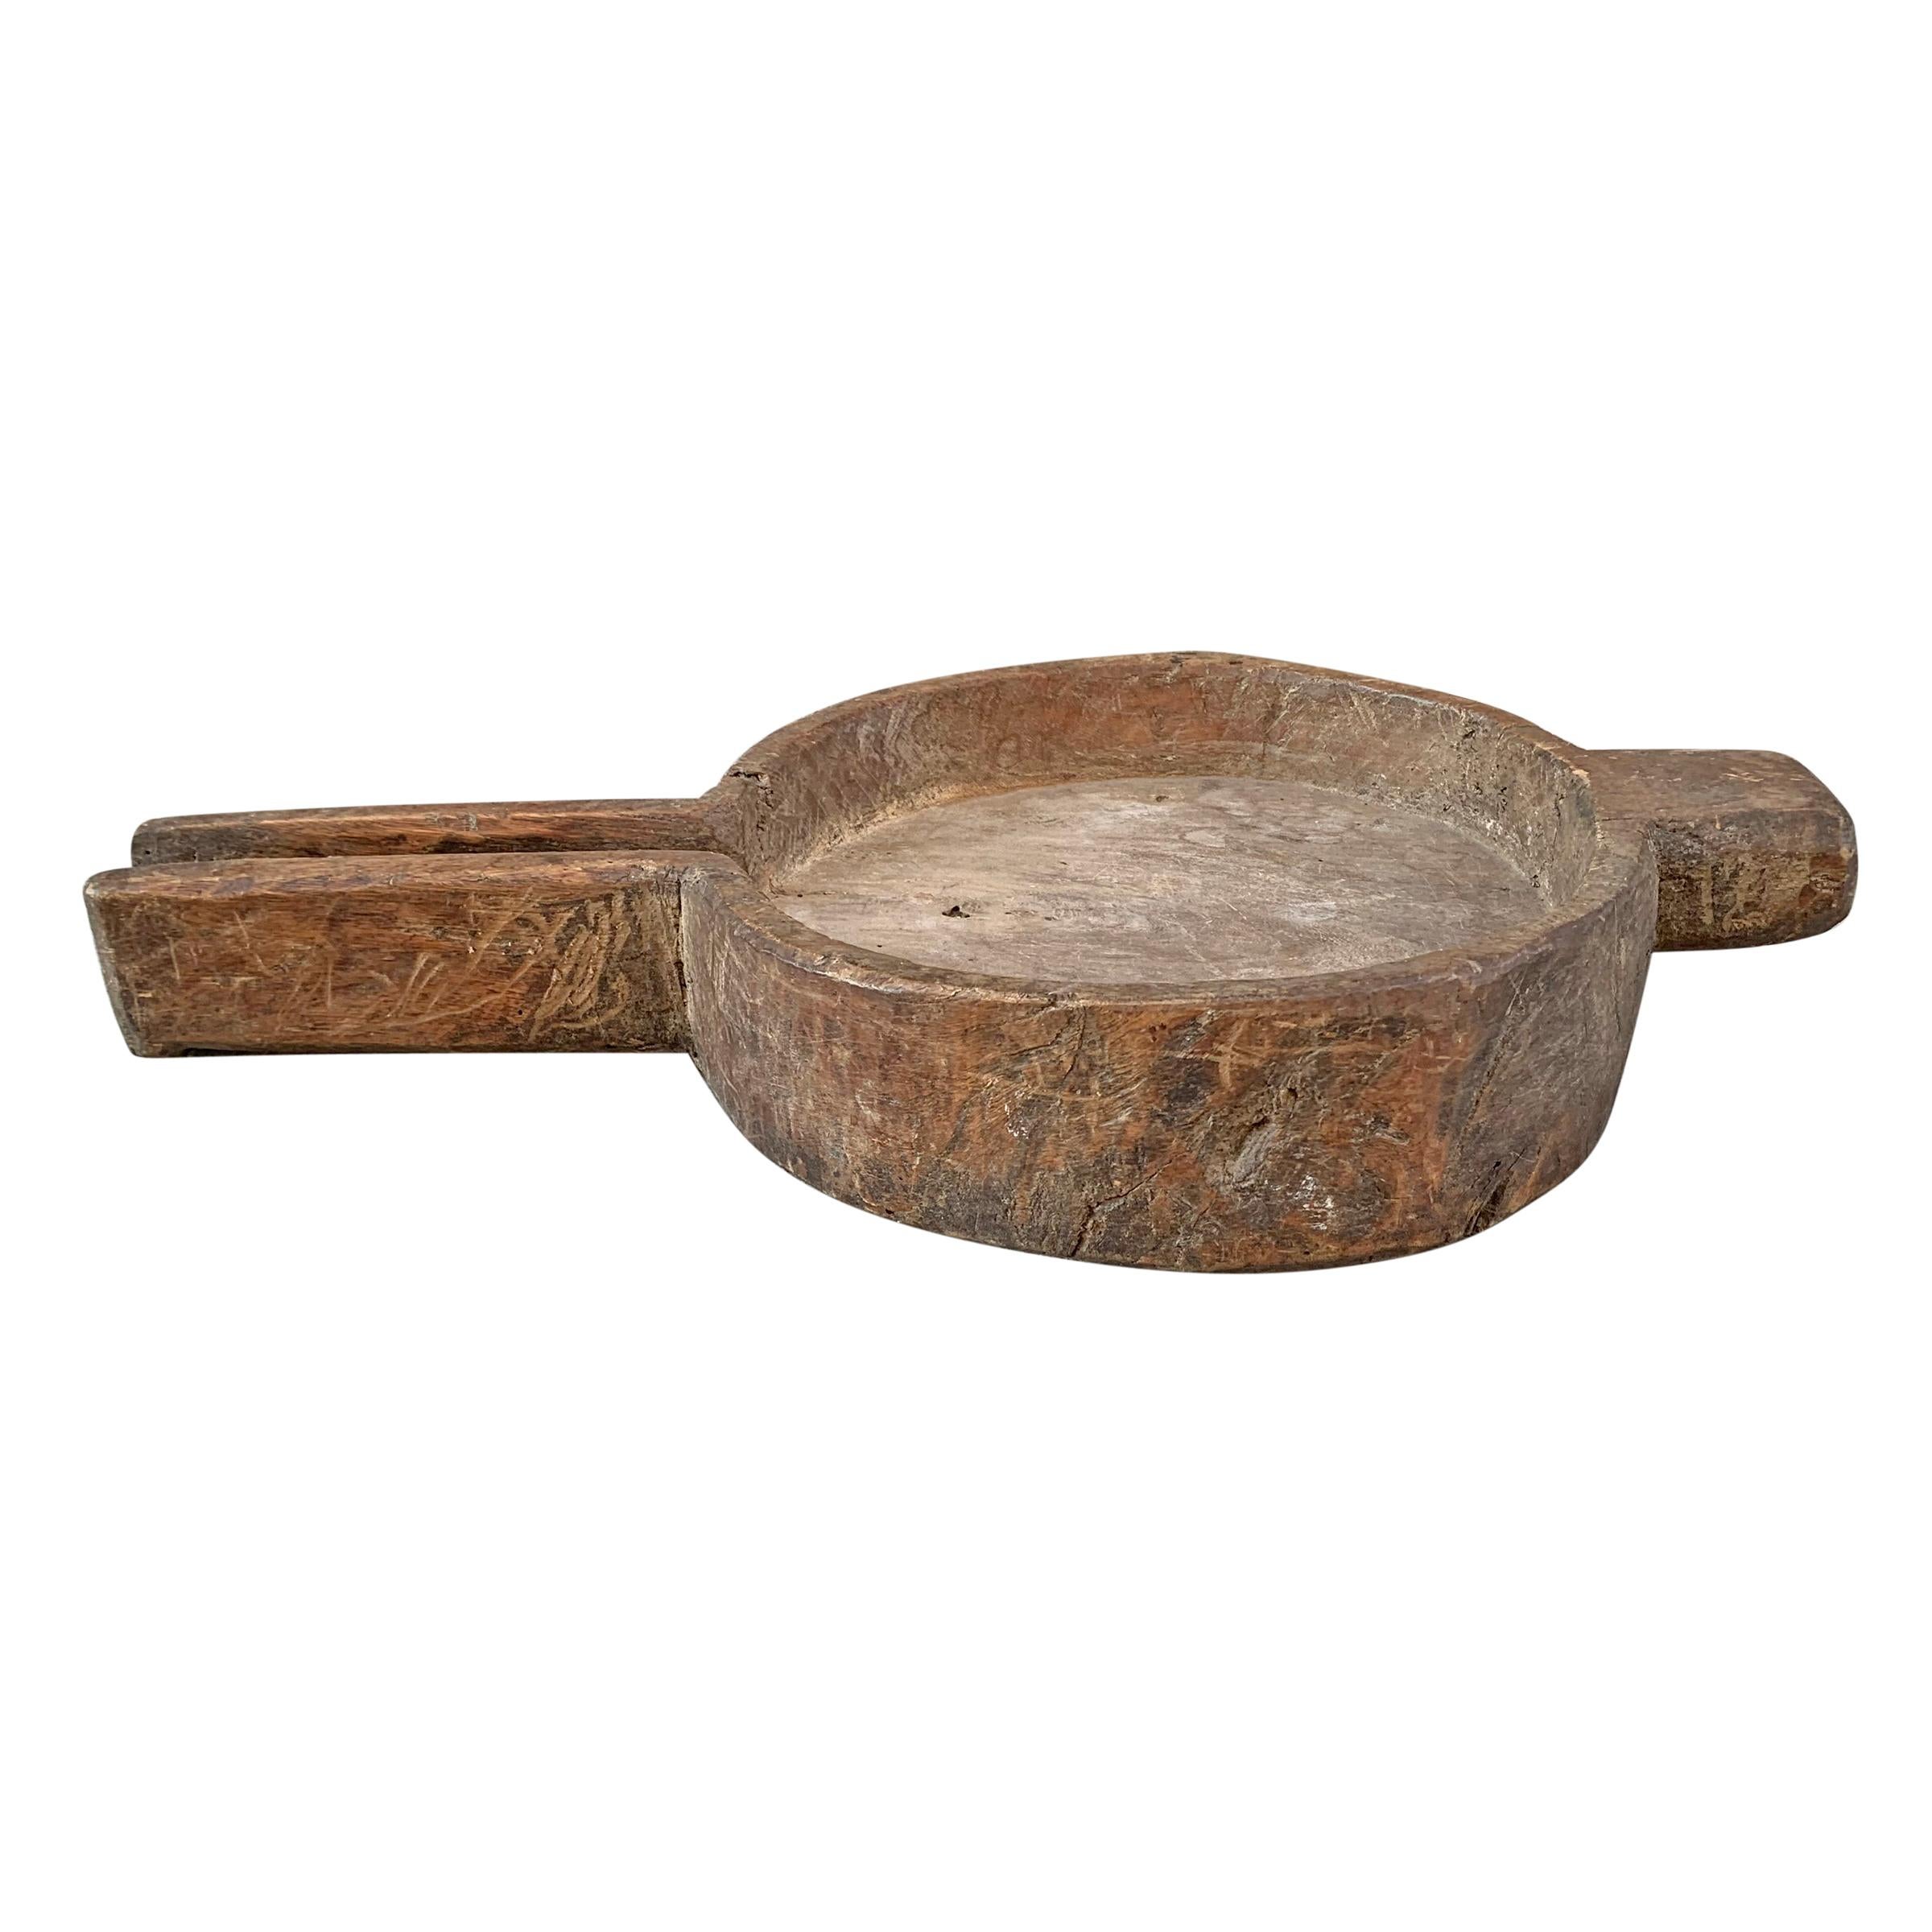 A fantastic 19th century English cheese press carved of one piece of wood with a wonderful patina and a spout on one end to allow the whey to drain out. Perfect as a vessel on your kitchen counter to hold fruit, or for use as a cheese and